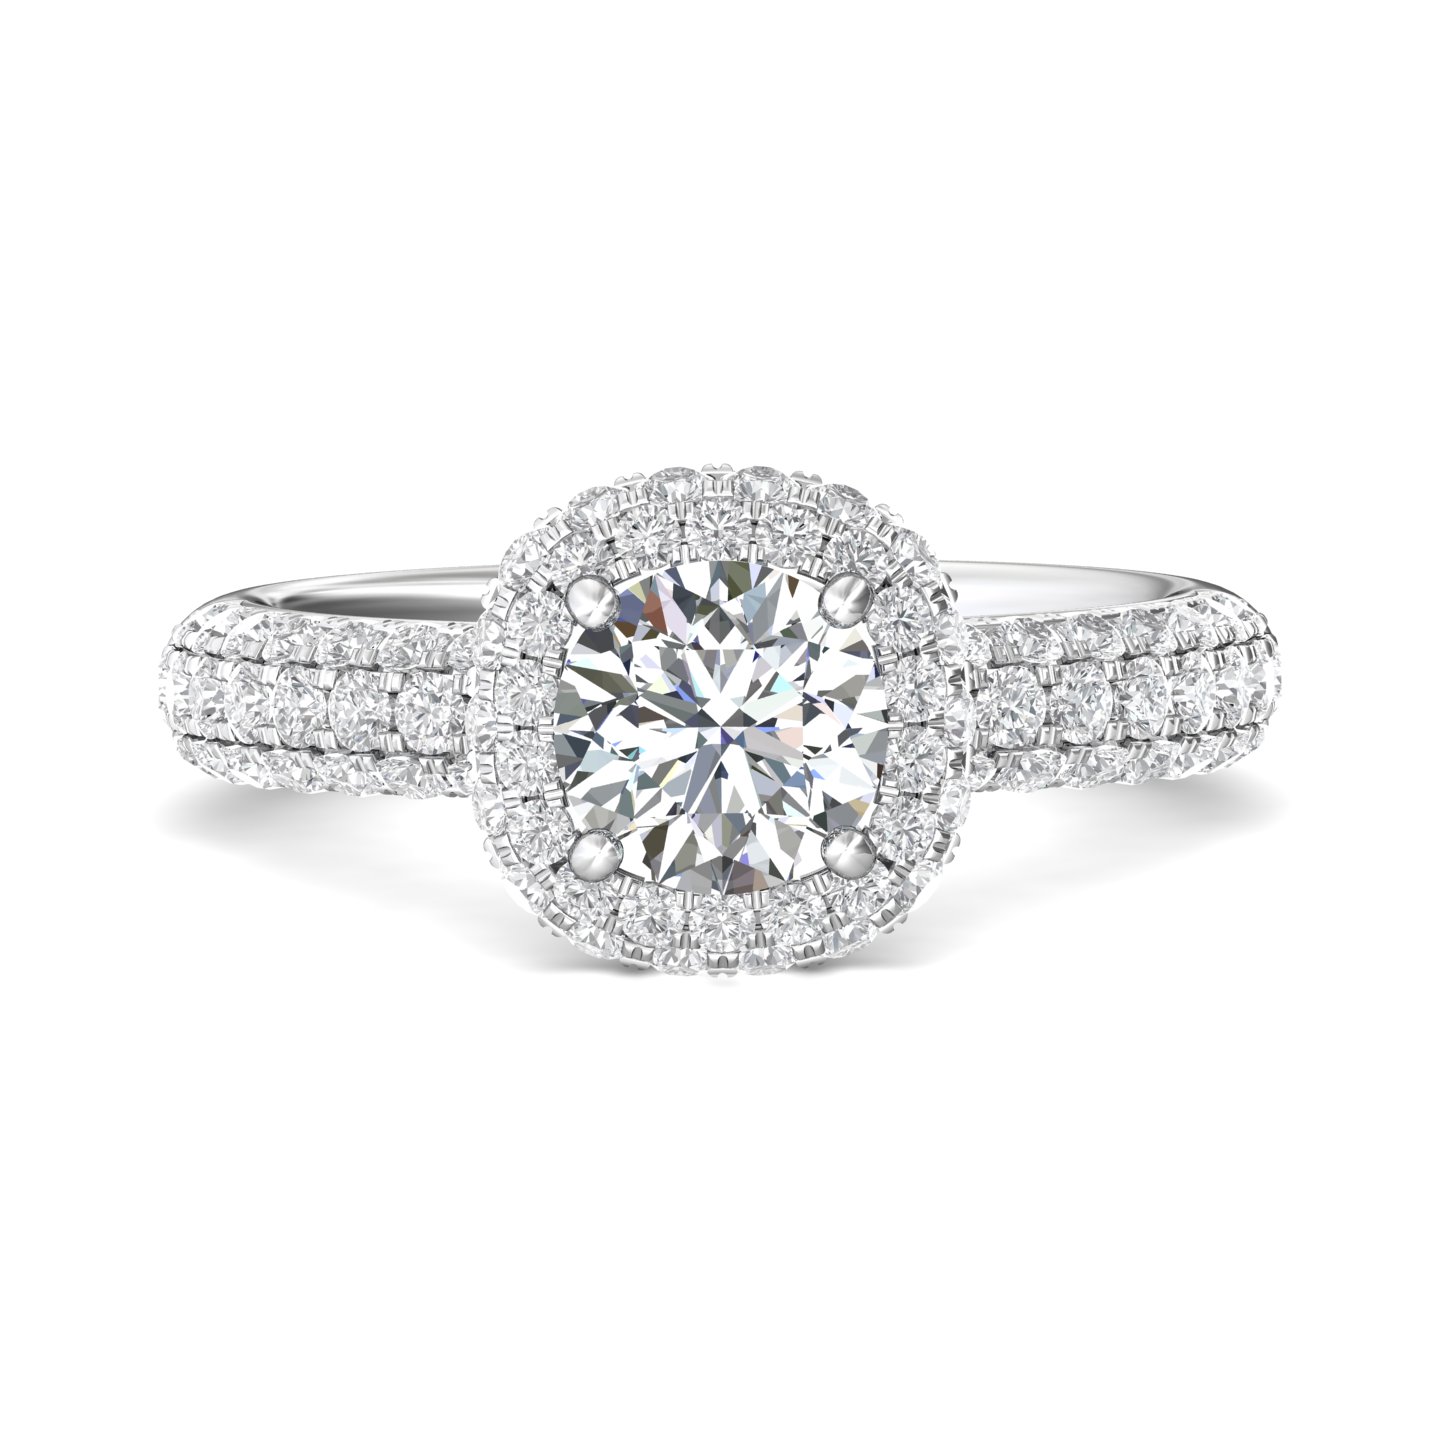 14K White Gold FlyerFit Micropave Halo Engagement Ring Christopher's Fine Jewelry Pawleys Island, SC